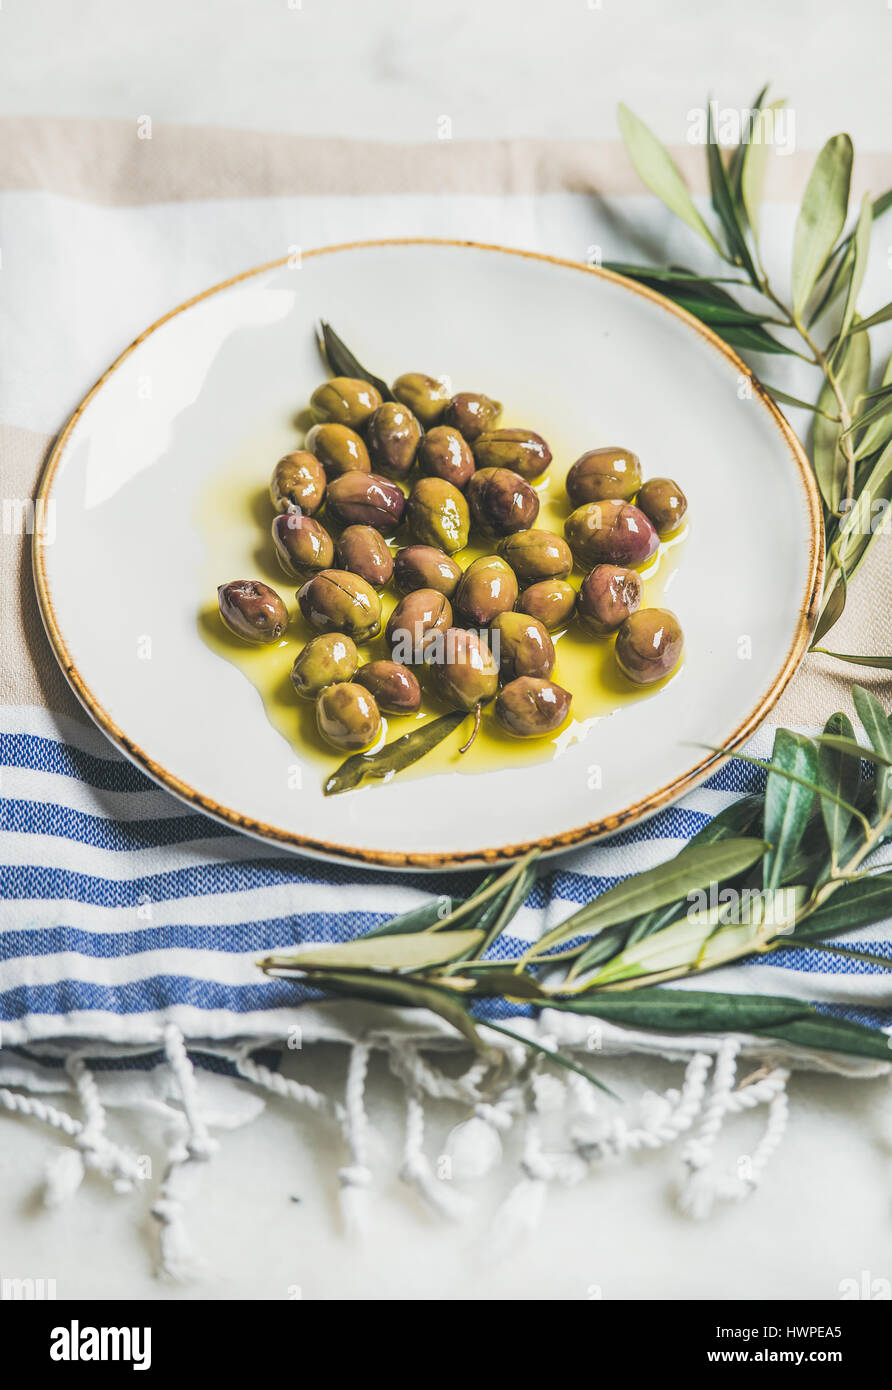 Pickled green Mediterranean olives and olive tree branch Stock Photo